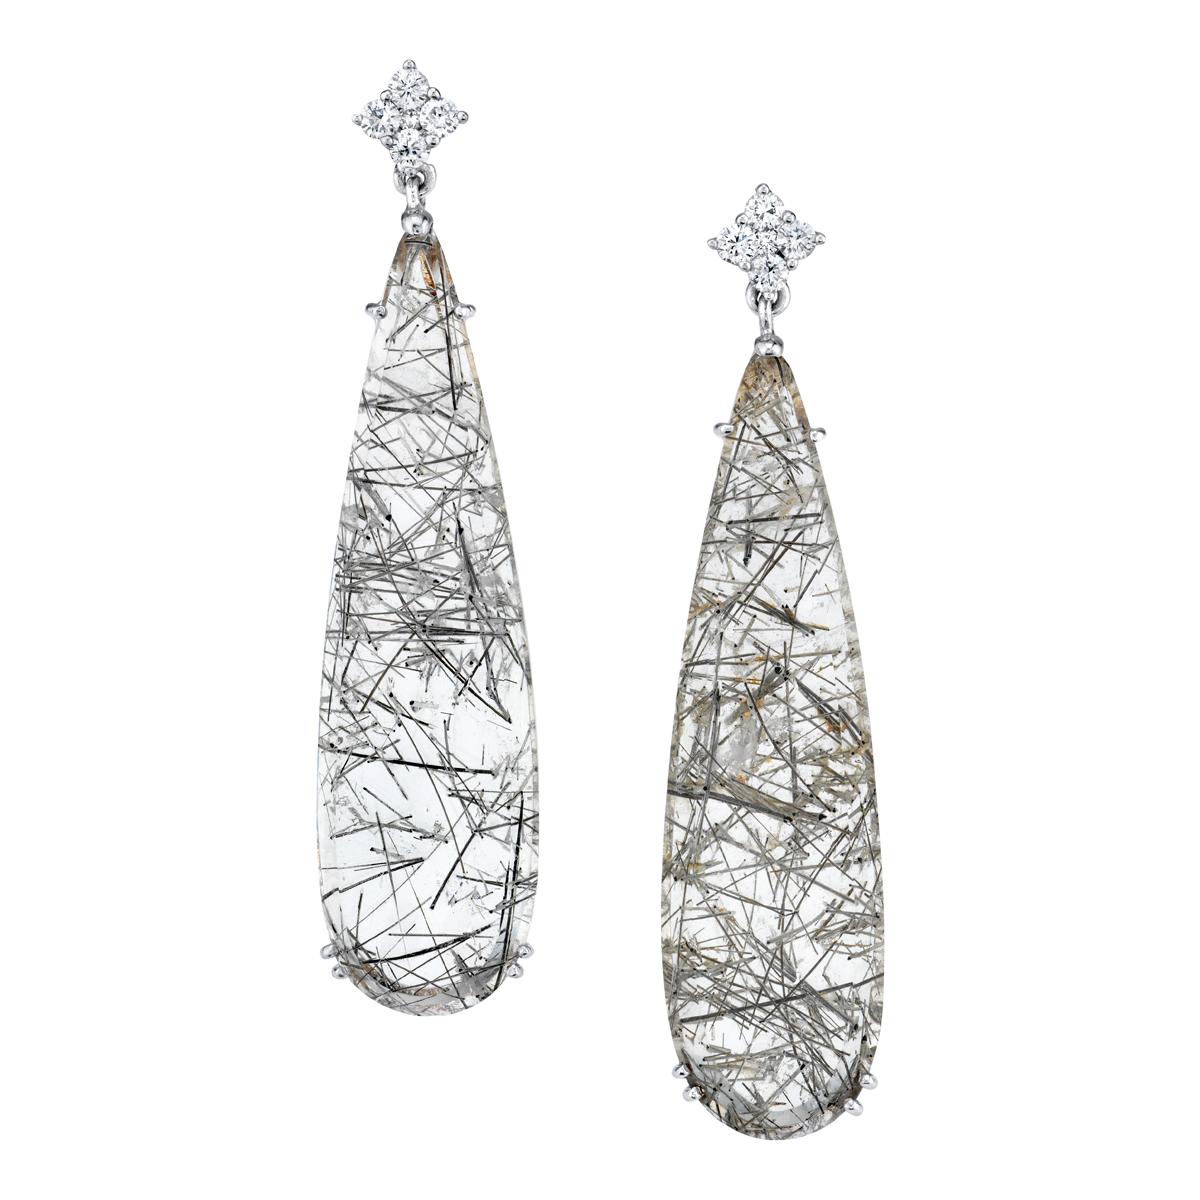 Actinolated Quartz and Diamond Drop Earrings in White Gold, 36.37 Carats Total